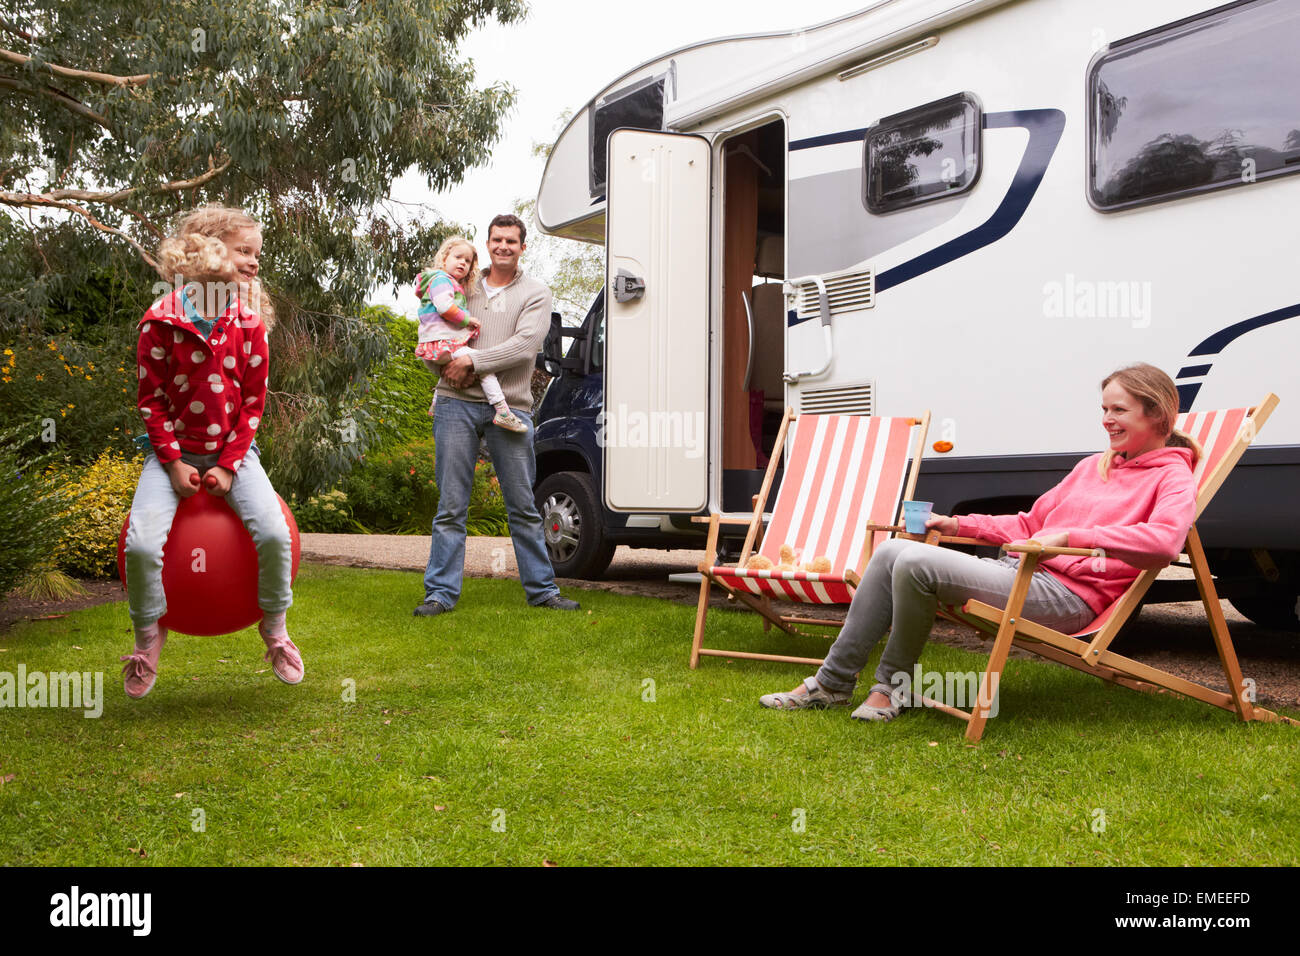 Family Enjoying Camping Holiday In Camper Van Banque D'Images